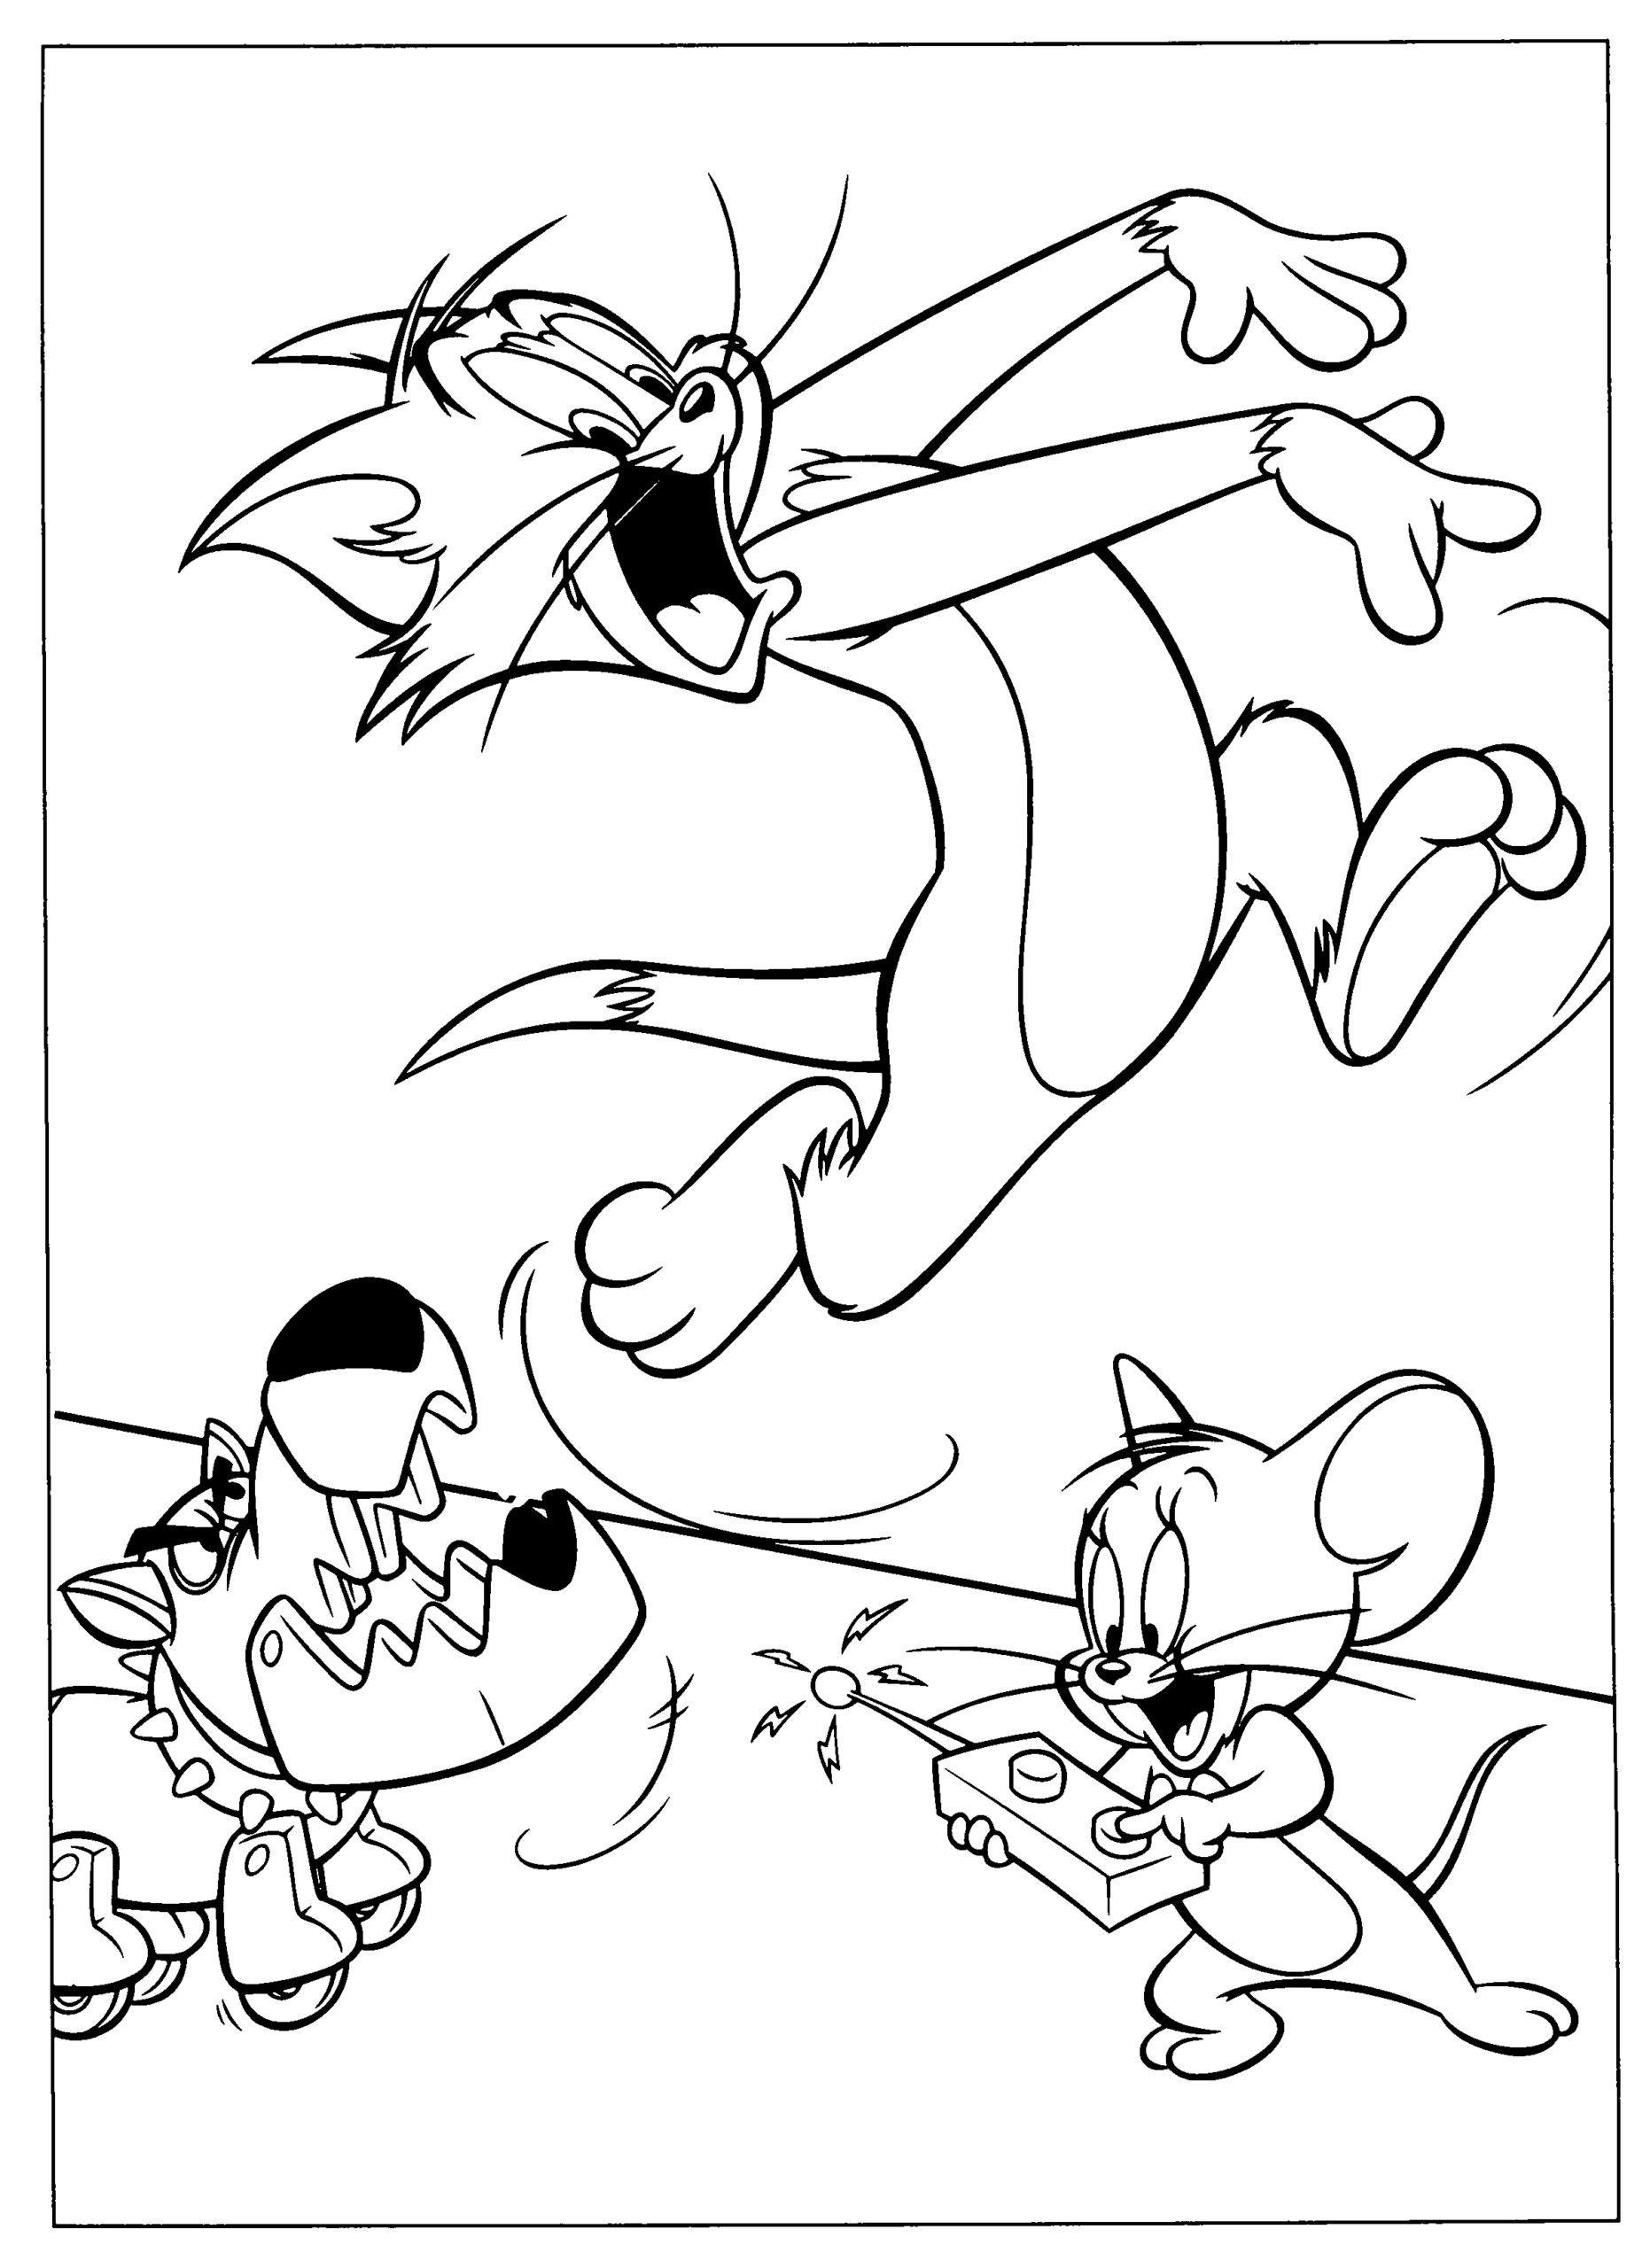 Tom and Jerry Coloring Pages TV Film Tom and Jerry Cartoon Printable 2020 10167 Coloring4free